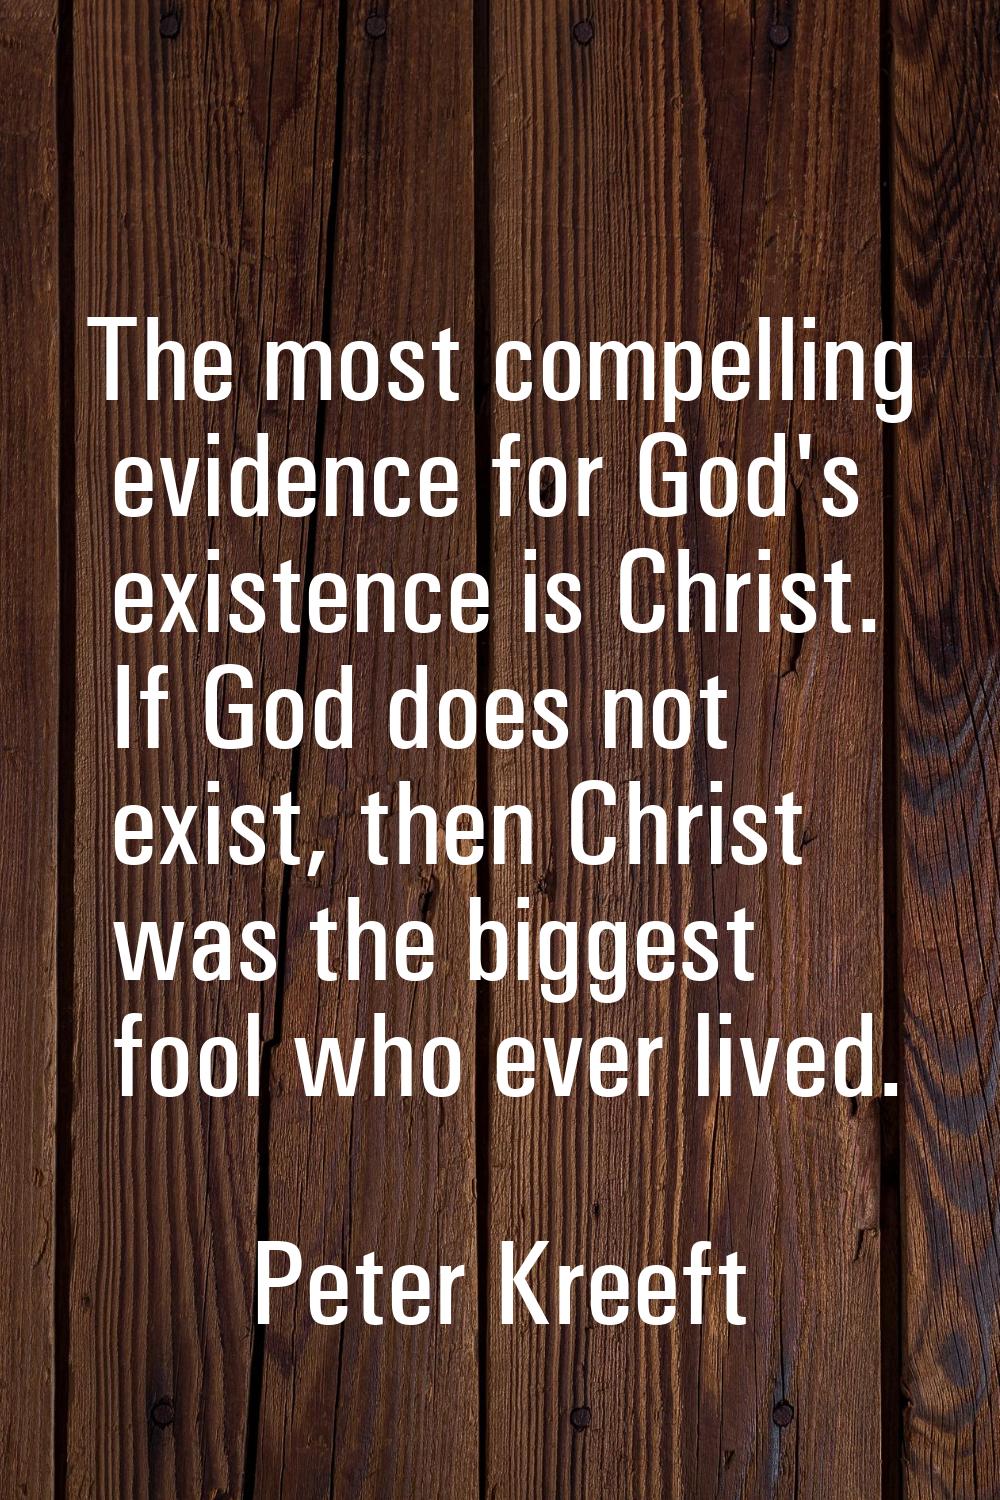 The most compelling evidence for God's existence is Christ. If God does not exist, then Christ was 